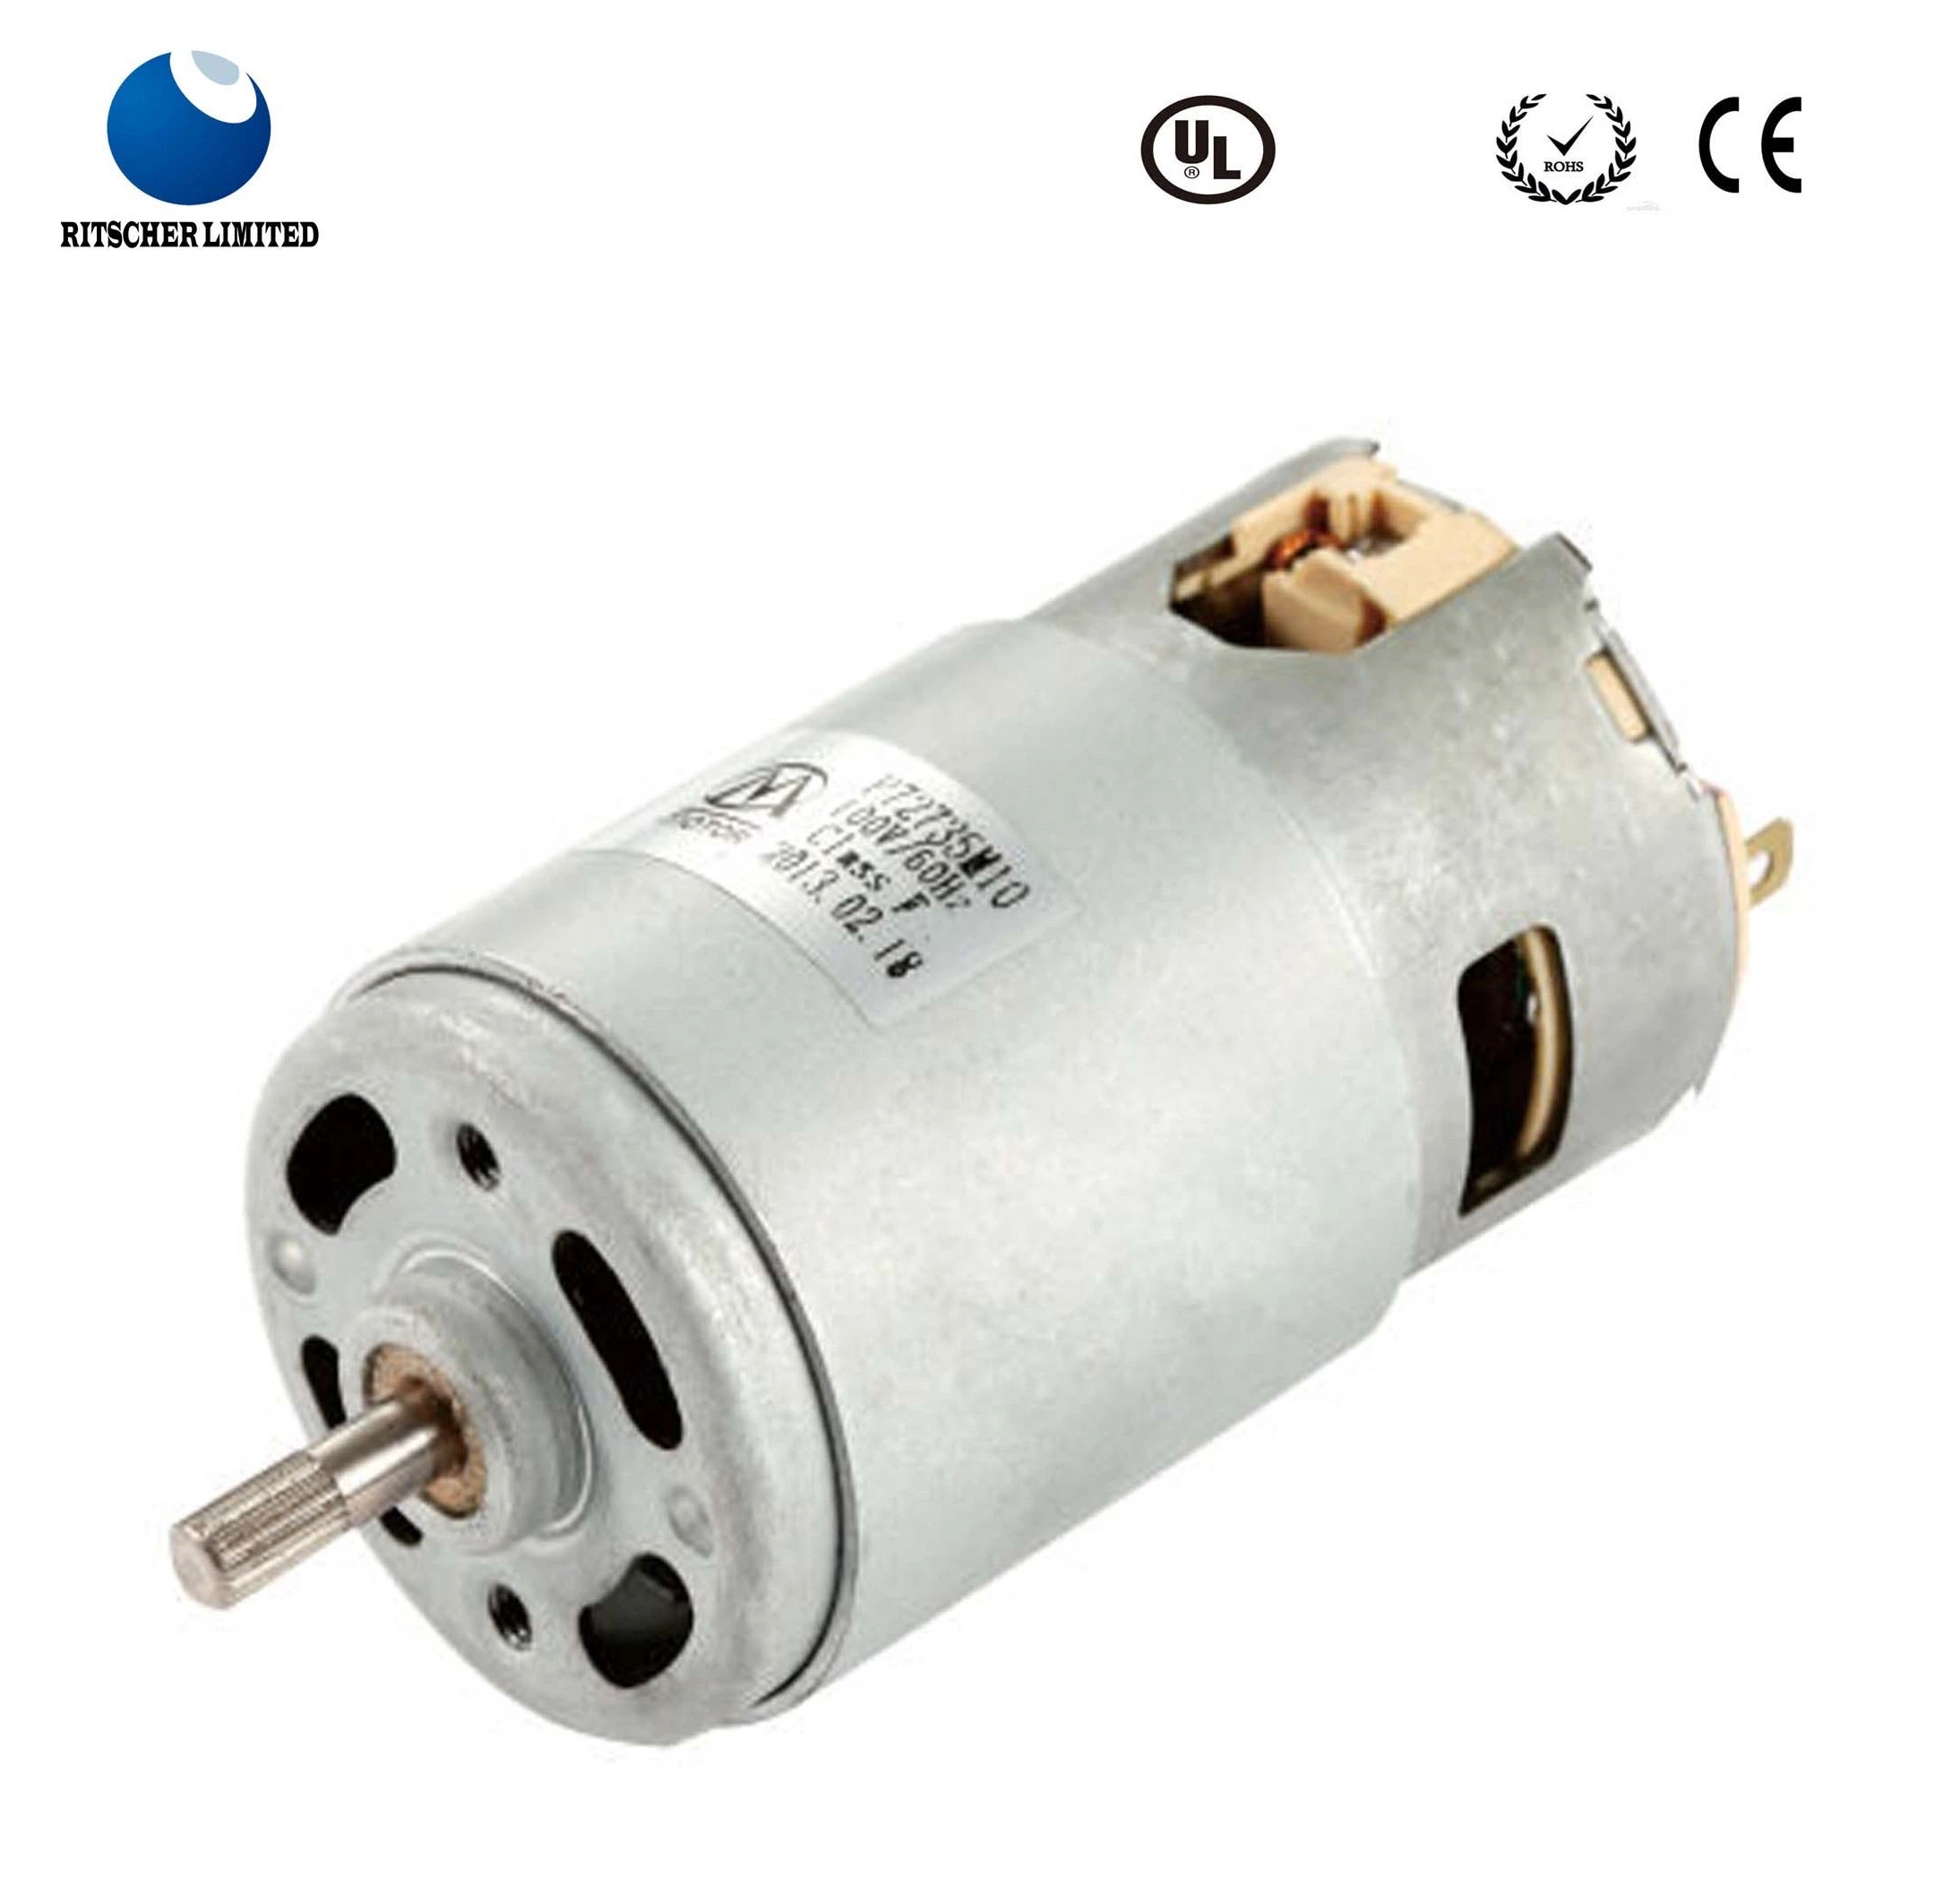 Electric Powerful DC Motor for Household Appliance Range Hood/Air Purifier/Hand Dryer